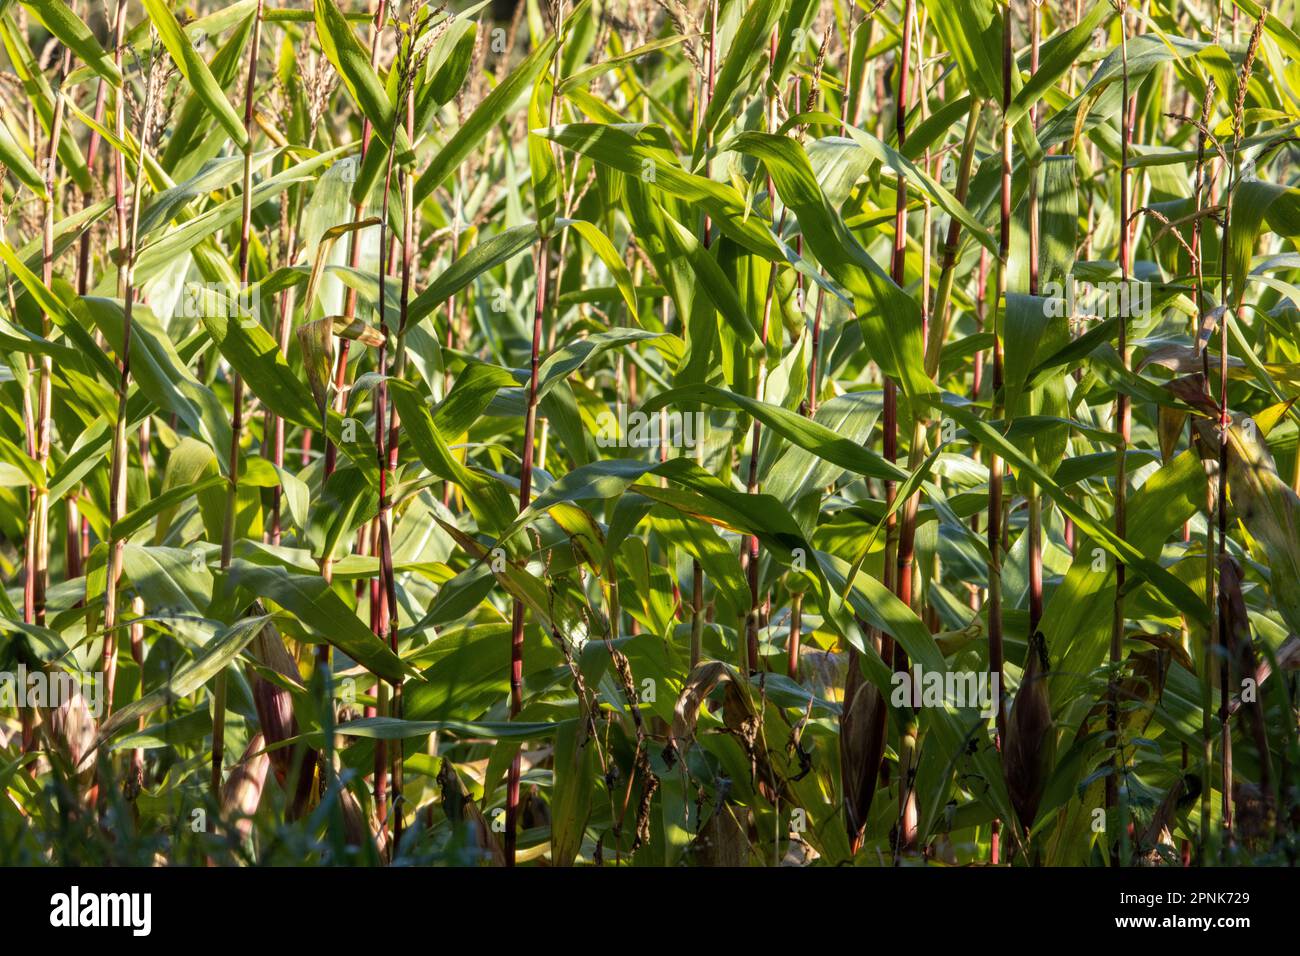 rows of maize growing in a field with brown soil and green leaves Stock Photo